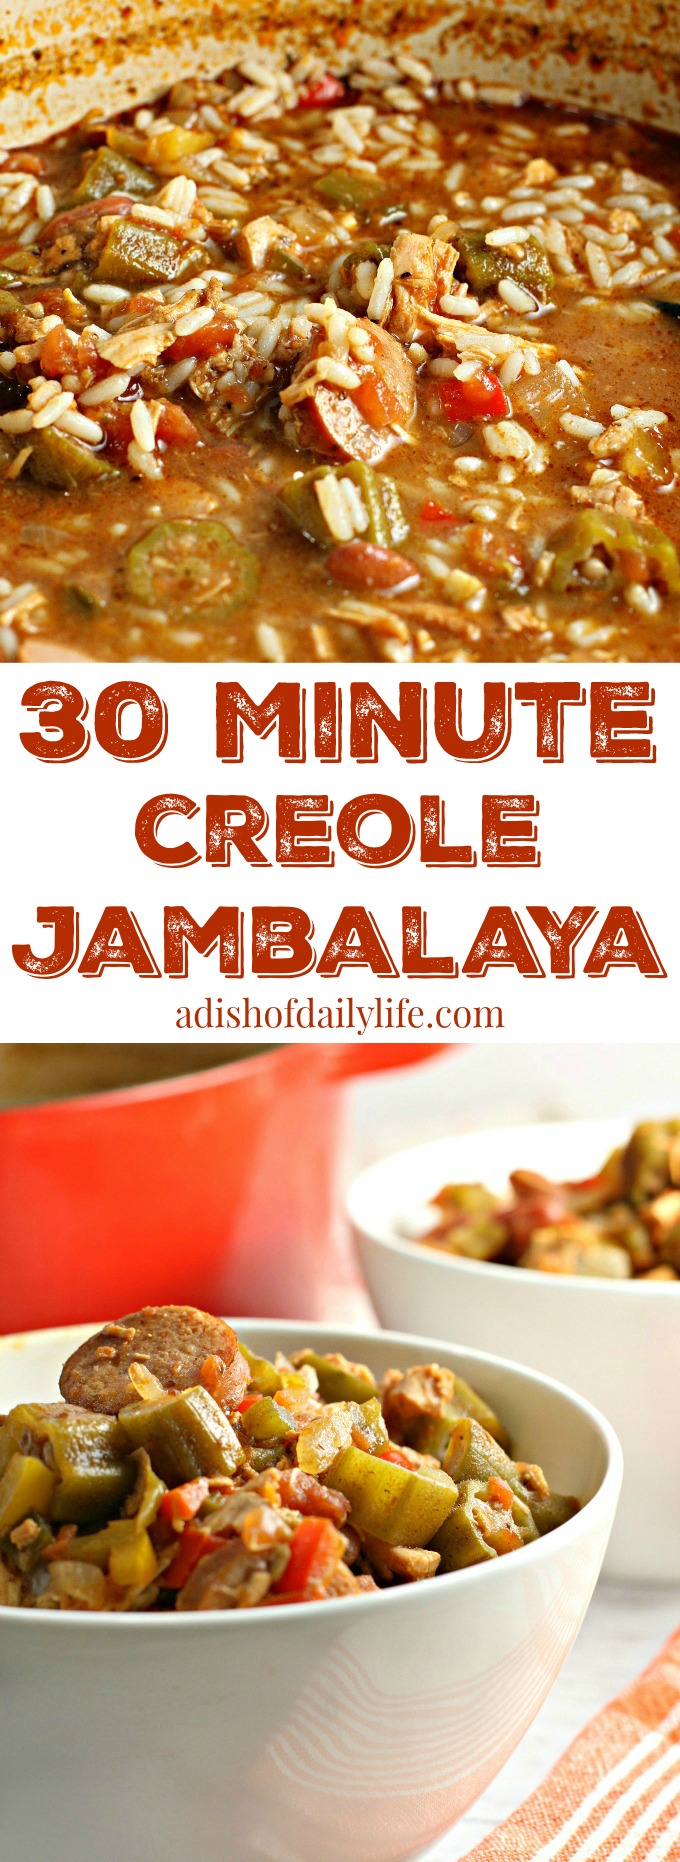 Enjoy a little Louisiana Southern comfort with this 30 Minute Creole Jambalaya! It's an easy weeknight meal for busy families and perfect for game day or Mardi Gras too. Very little prep work. 